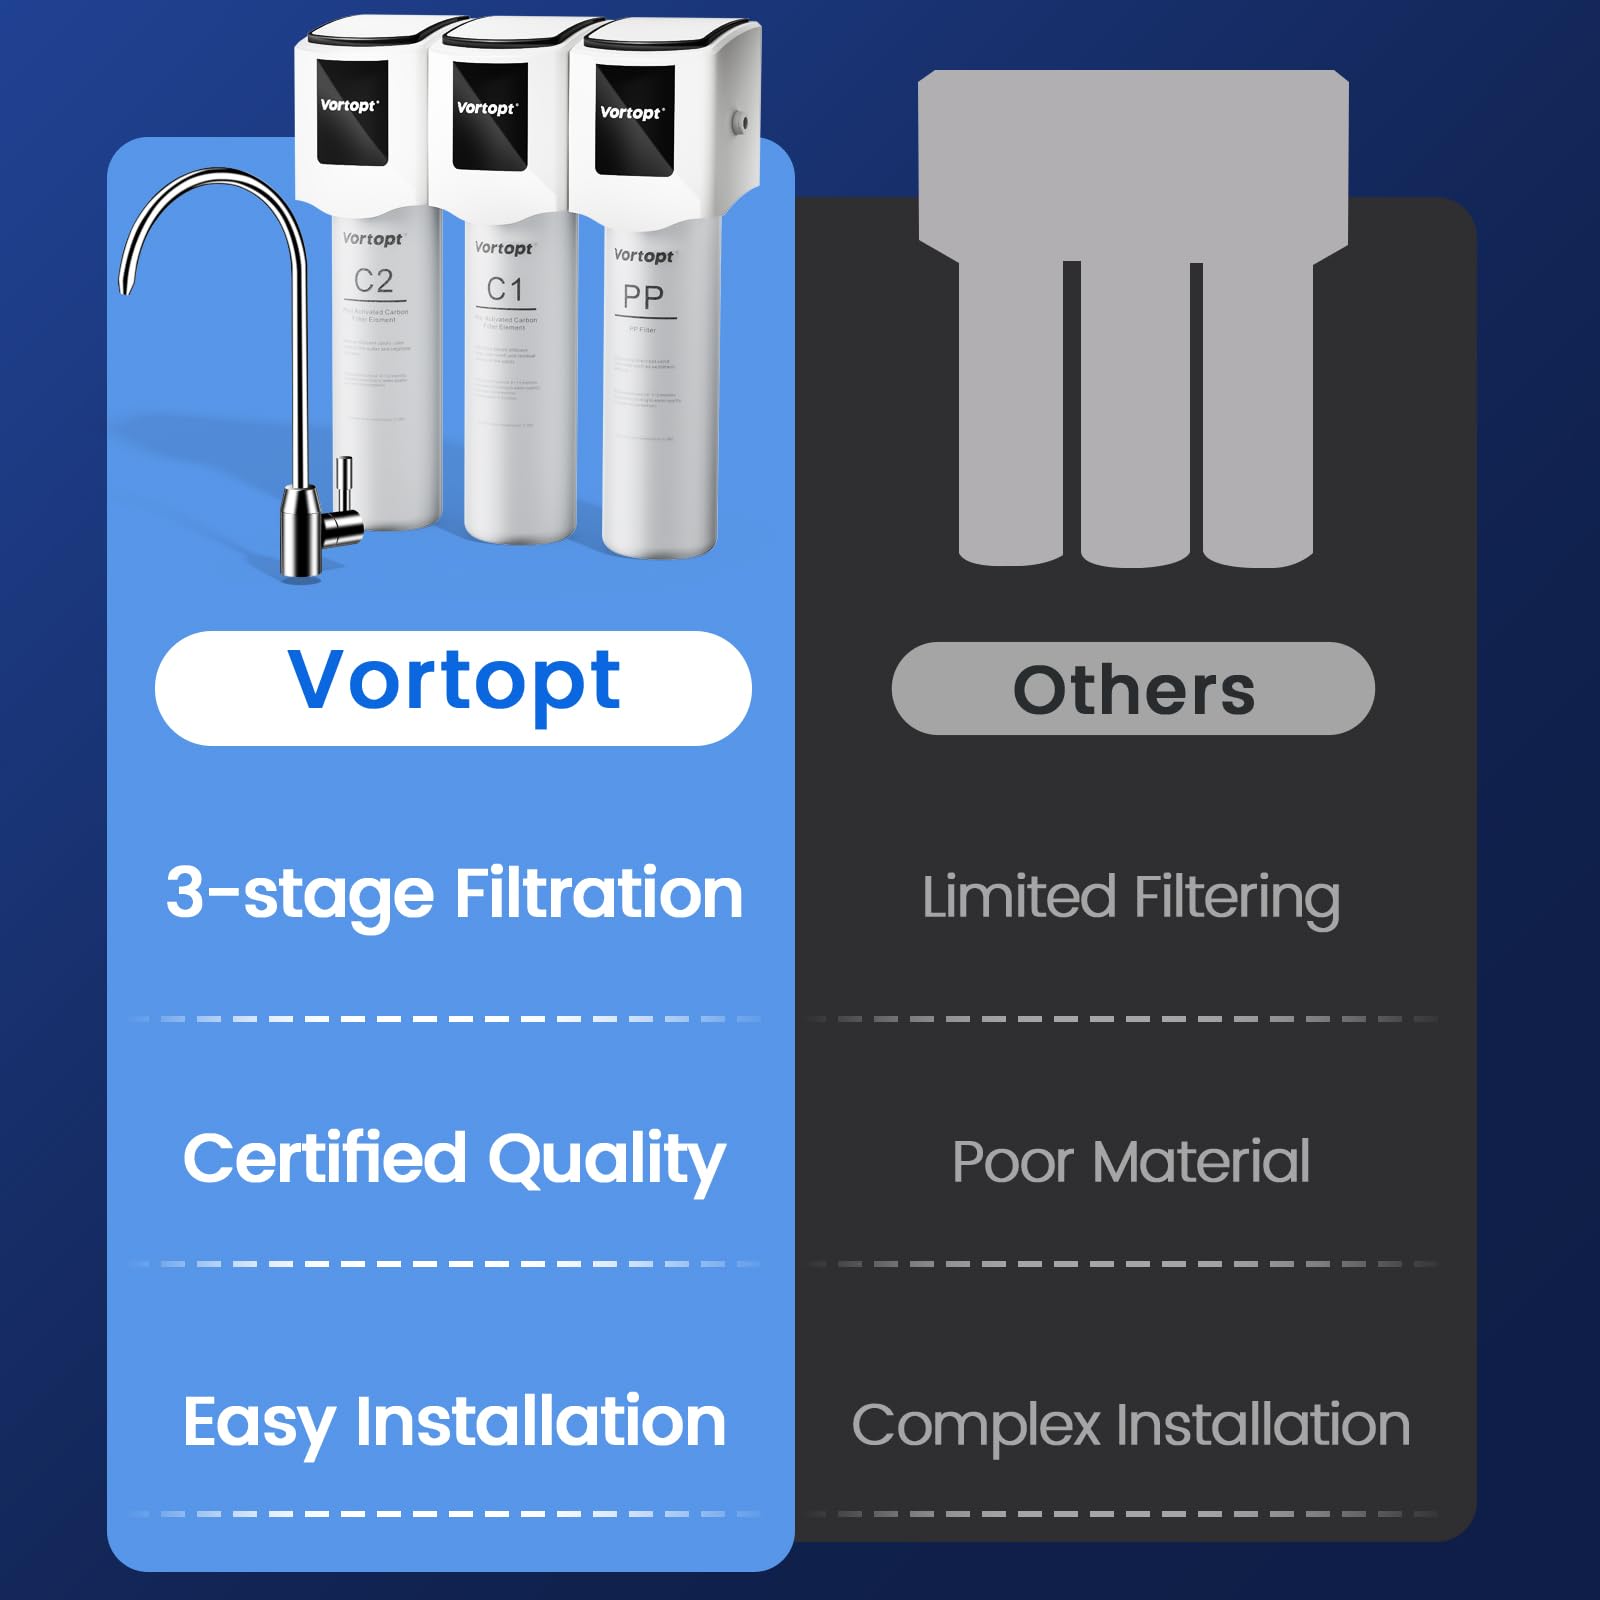 Vortopt Under Sink Water Filter System - 3-stage Filtration System with 304 Stainless Steel Faucet, NSF Certificated Water Purifier for Kitchen & Bathroom, Remove Lead, Chlorine, Odor & Bad Taste, F01